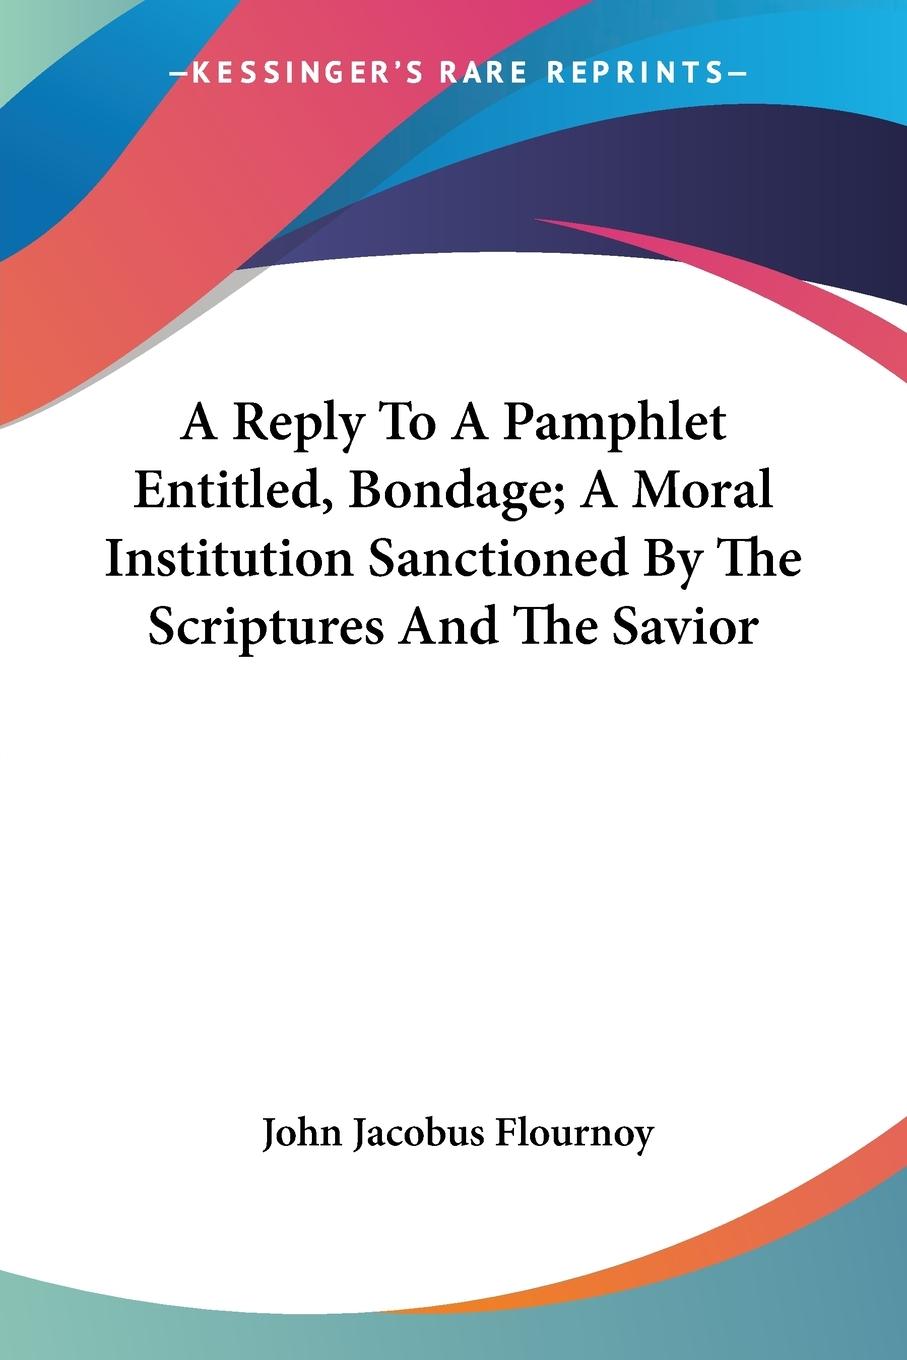 A Reply To A Pamphlet Entitled, Bondage A Moral Institution Sanctioned By The Scriptures And The Savior - Flournoy, John Jacobus